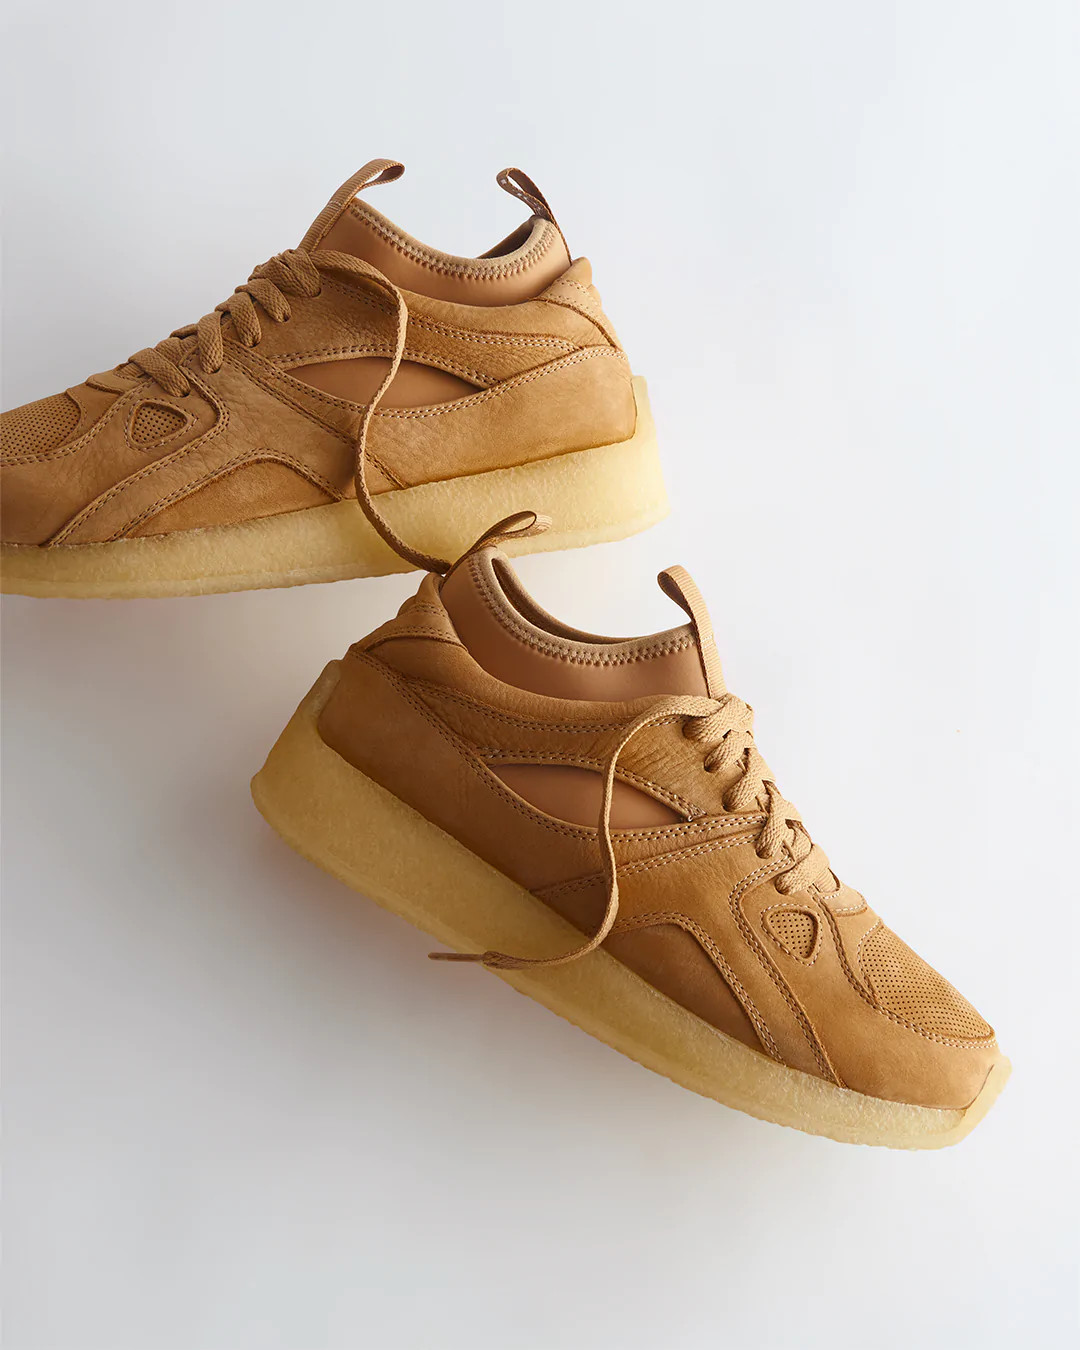 8th St by Ronnie Fieg for Clarks Originals Fall 2022 at Kith Tokyo